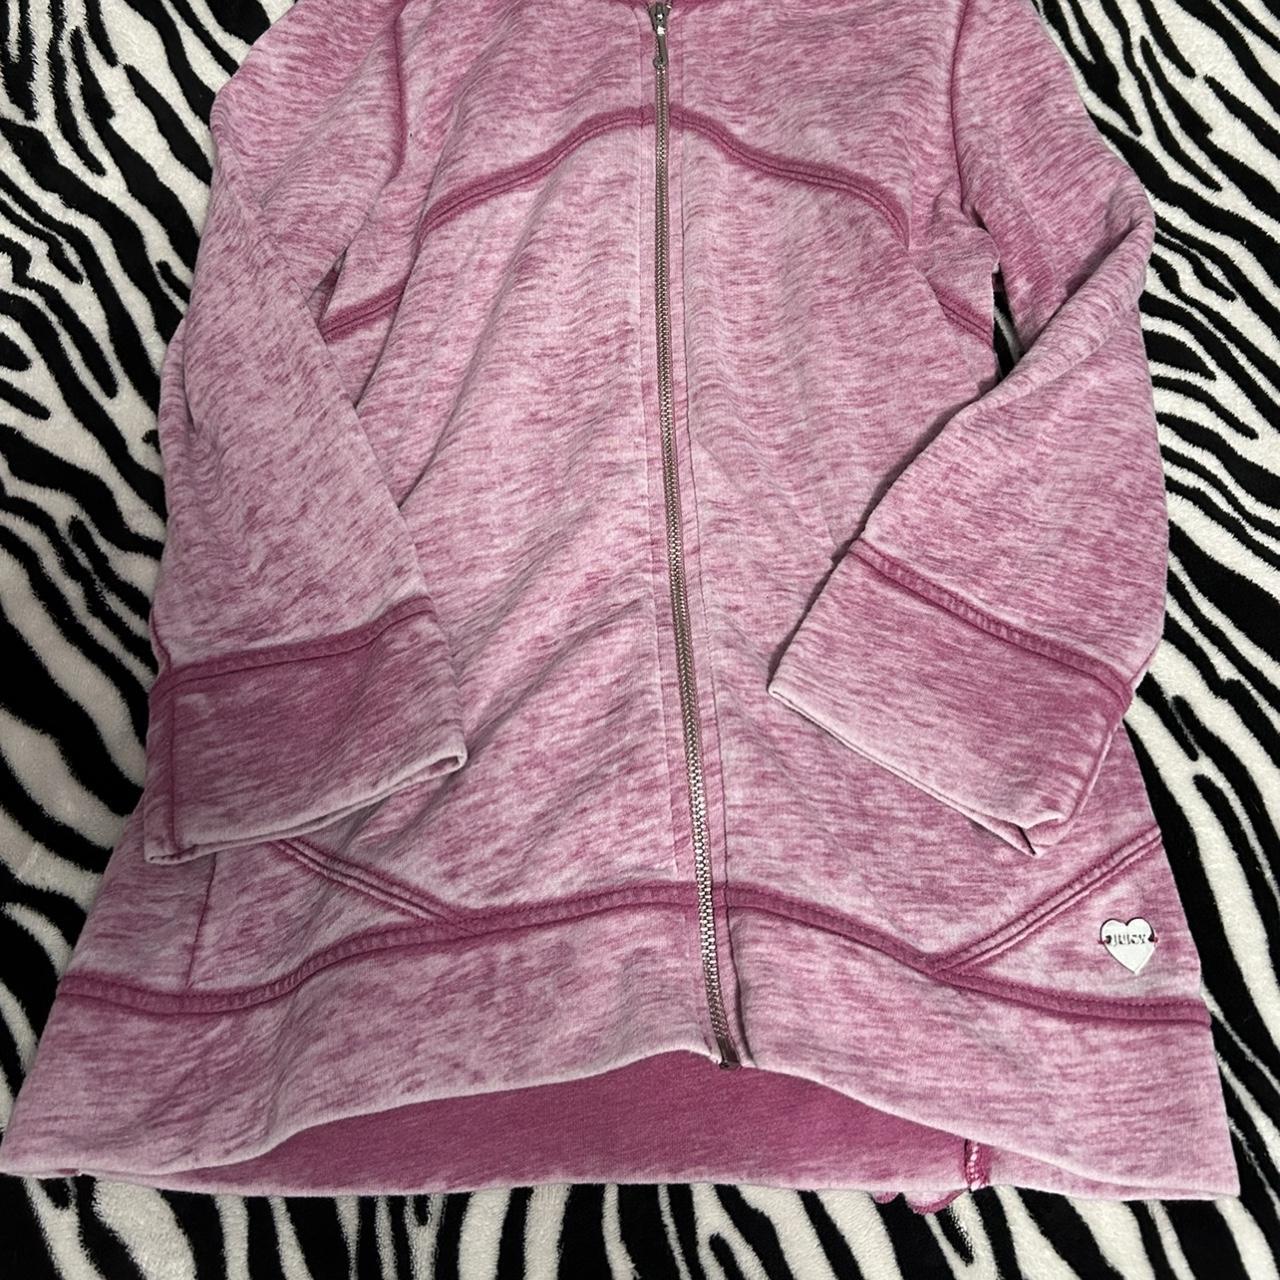 Rare 2010 Juicy Couture Y2K Track Top Size Large... - Depop